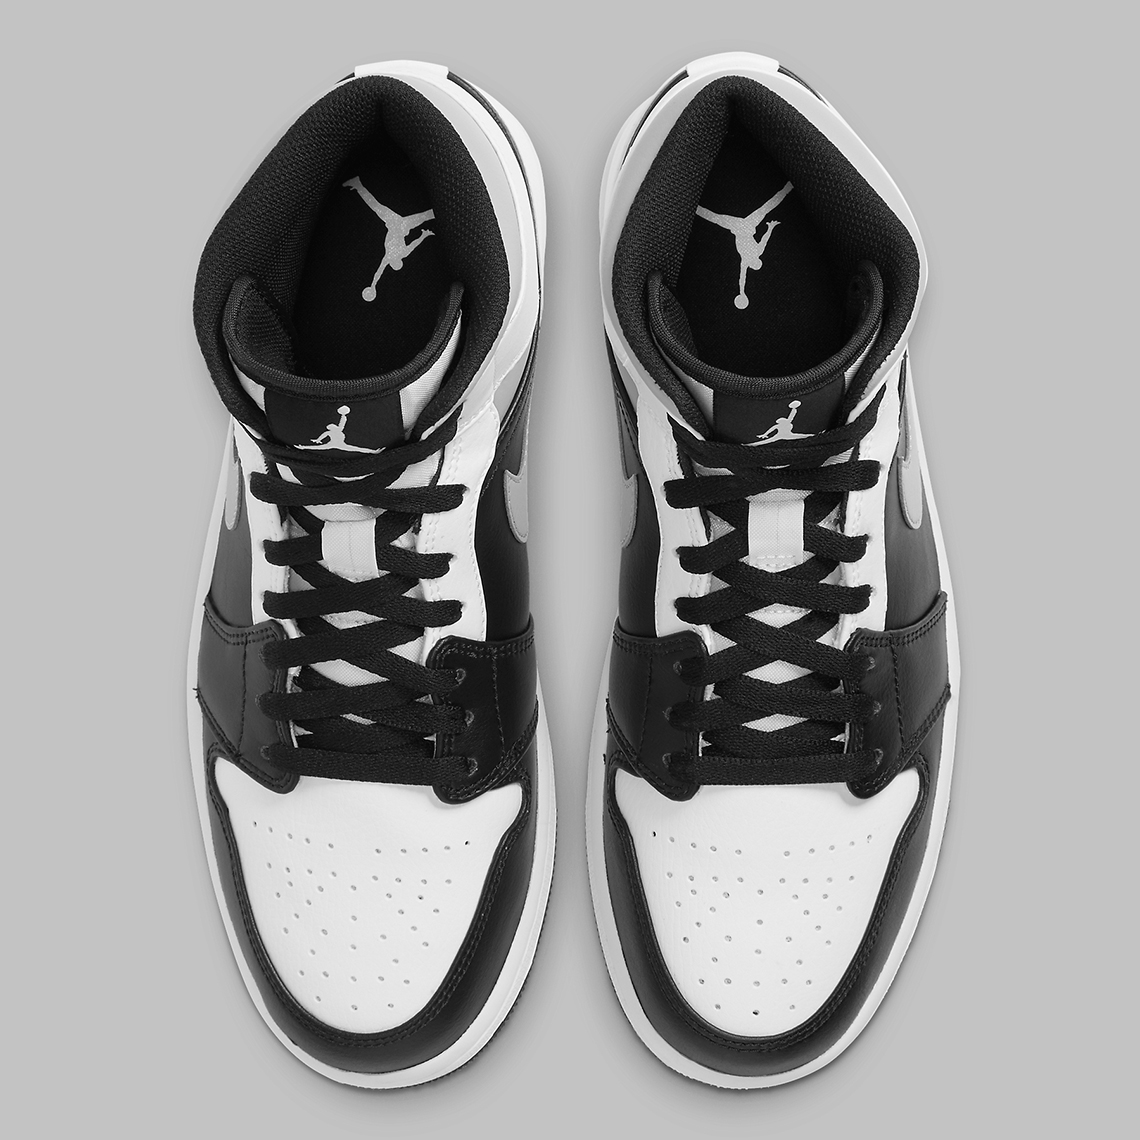 jordan 1 mid white shadow outfit